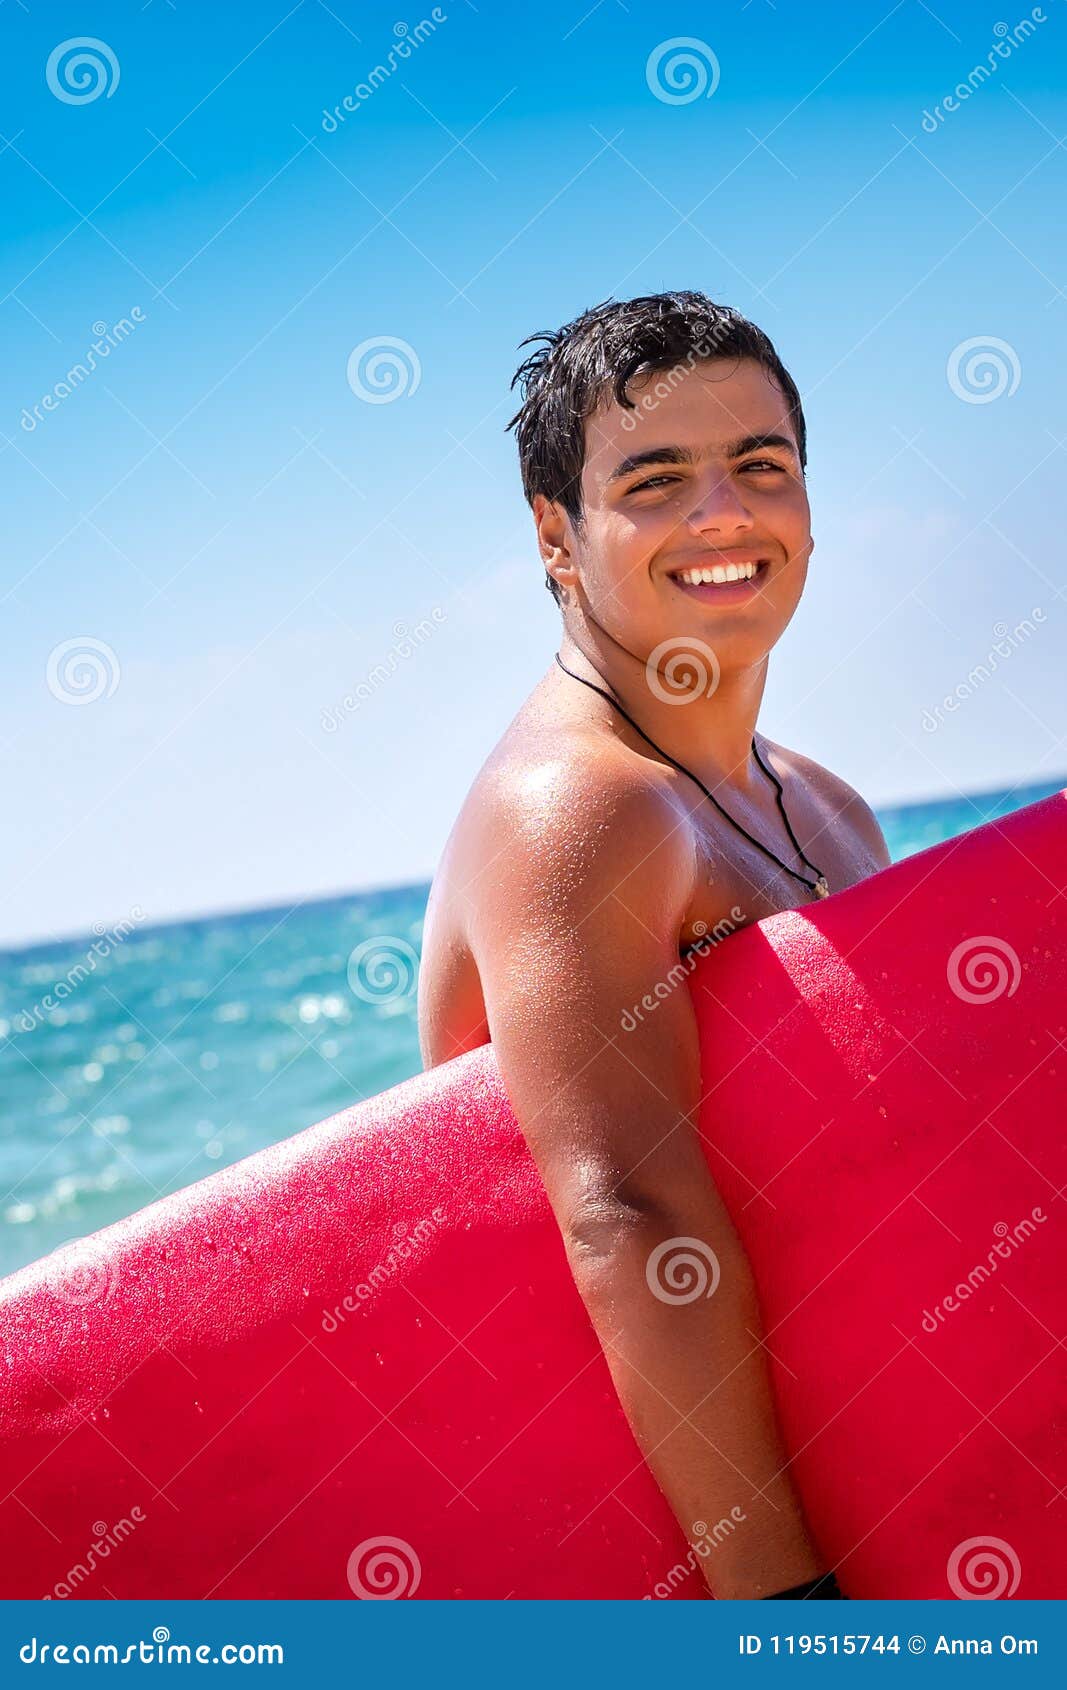 Cheerful Surfboarder Portrait Stock Photo - Image of adult, summer ...